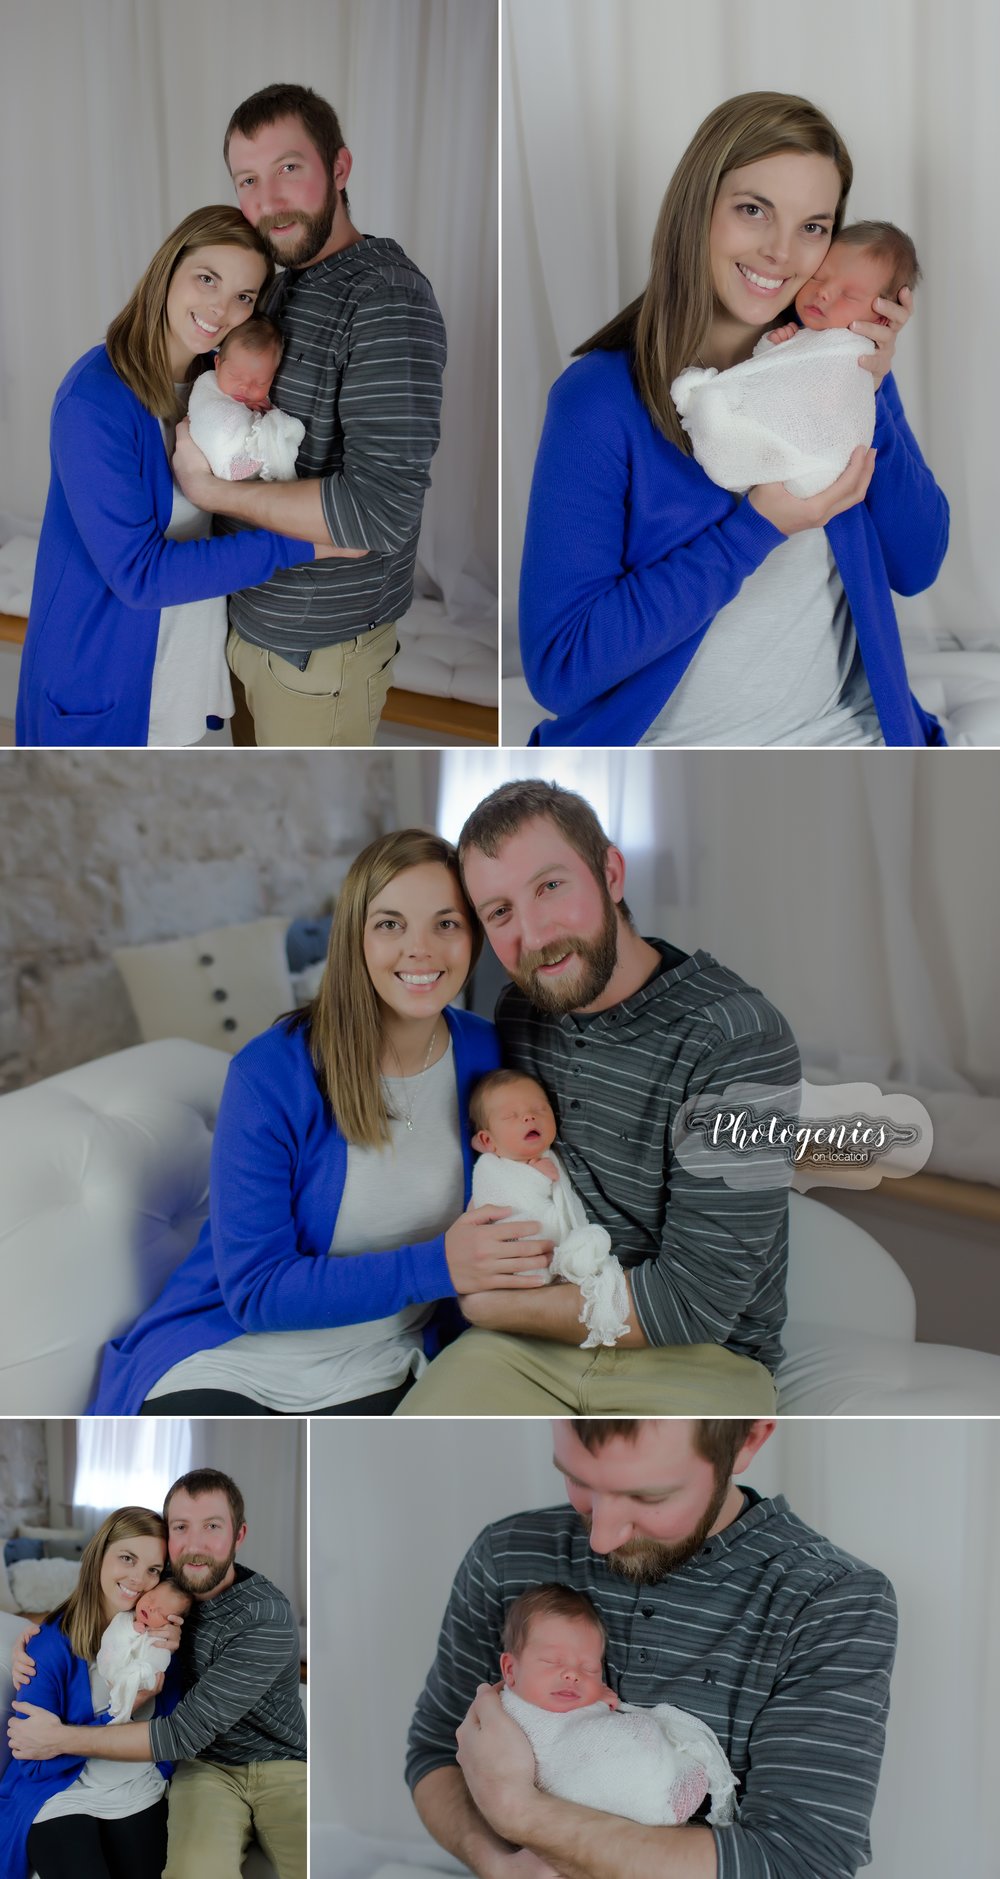  newborn_boy_photography_ideas_romper_hair_props_neutrals_simple_pictures_studio_baby_parents_family_poses.jpg 